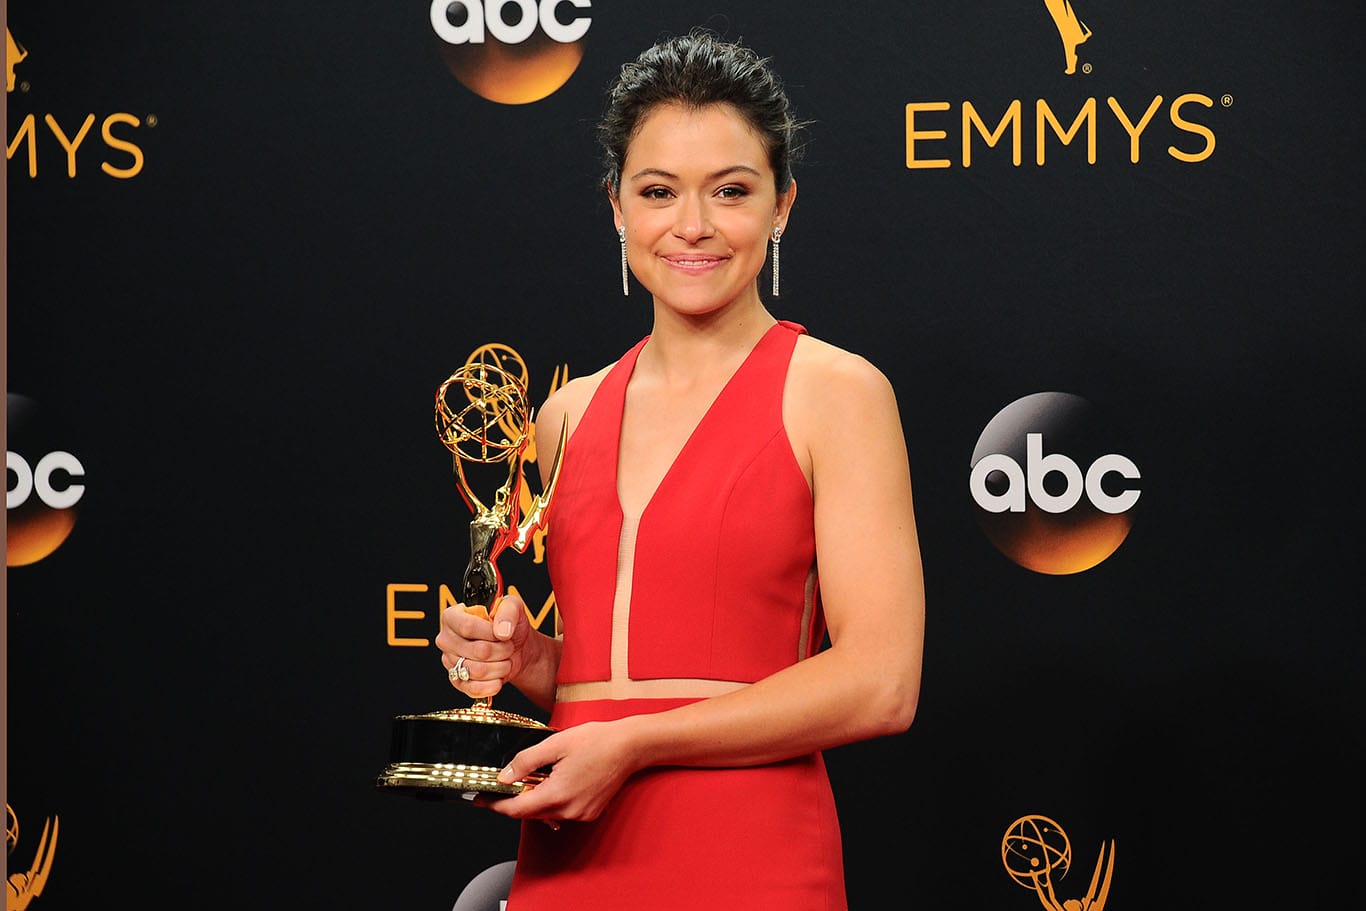 , Los Angeles, CA - 9/18/2016 - The 68th Primetime Emmy Awards - Press Room at Microsoft Theater -PICTURED: Tatiana Maslany -PHOTO by: Kyle Rover/startraksphoto.com -KR71408 Editorial - Rights Managed Image - Please contact www.startraksphoto.com for licensing fee Startraks Photo New York, NY For licensing please call 212-414-9464 or email sales@startraksphoto.com Startraks Photo reserves the right to pursue unauthorized users of this image. If you violate our intellectual property you may be liable for actual damages, loss of income, and profits you derive from the use of this image, and where appropriate, the cost of collection and/or statutory damages.